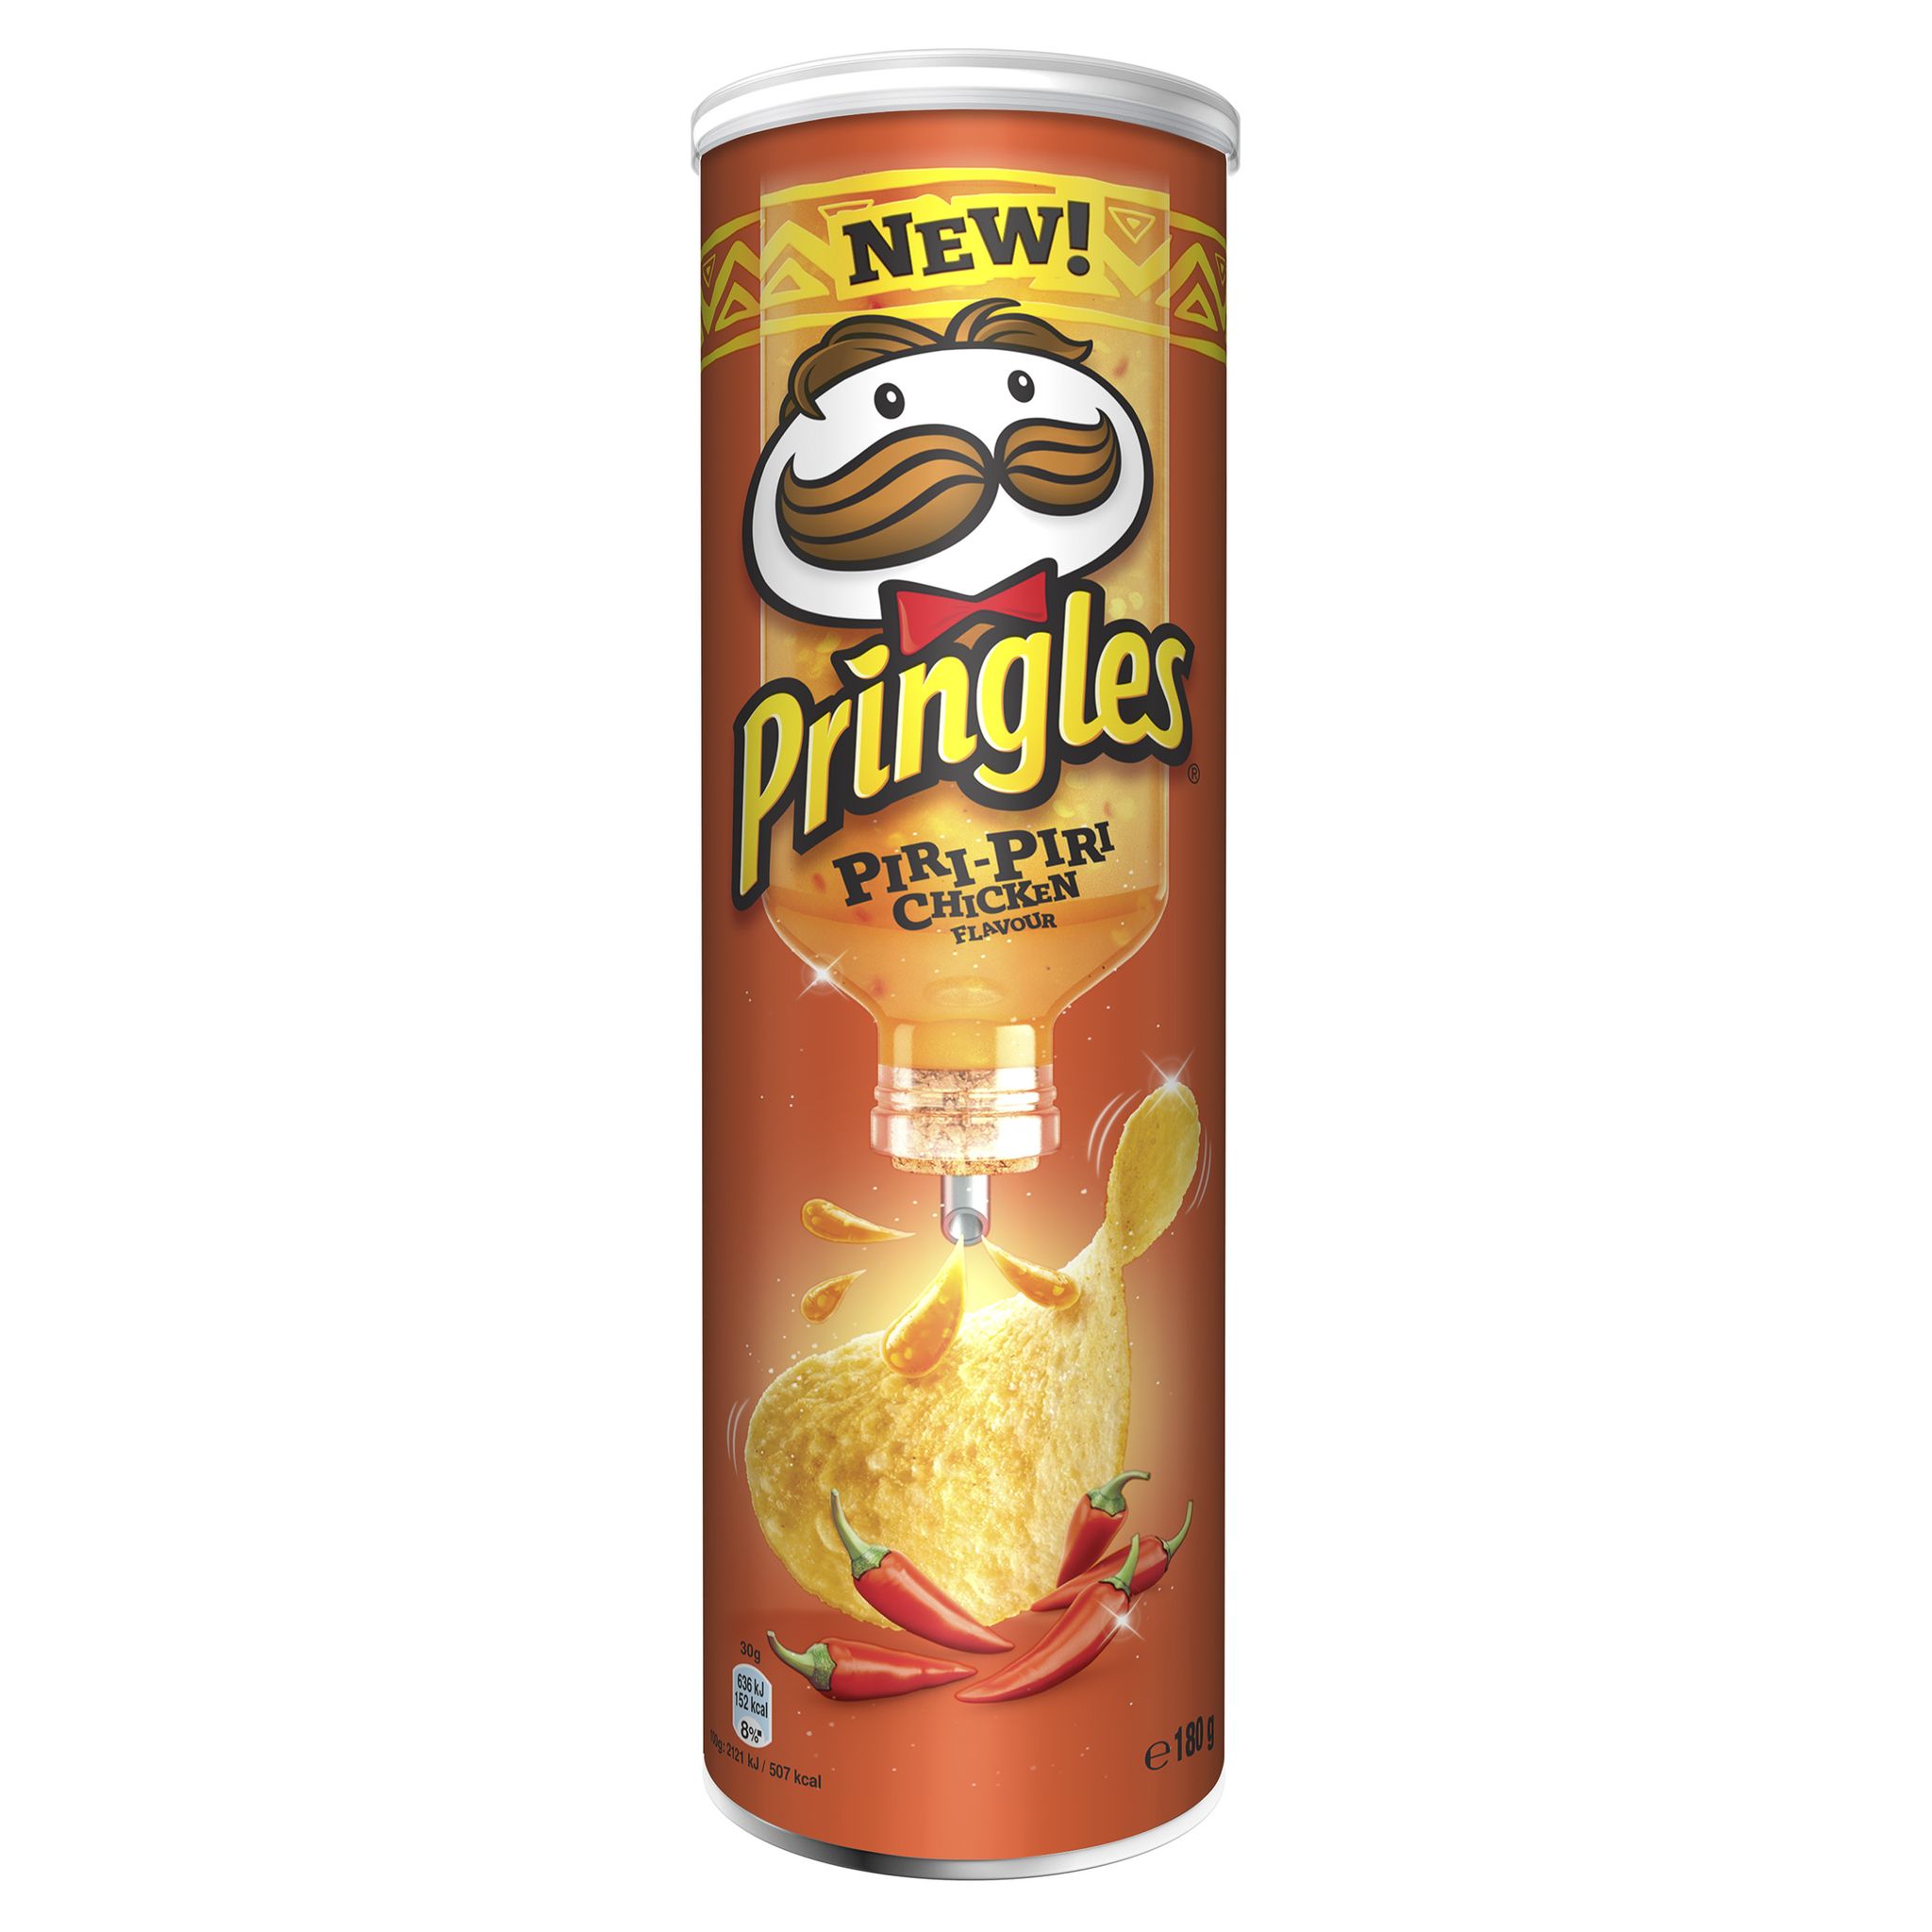 Piri Piri Pringles Are Now Available In UK Supermarkets